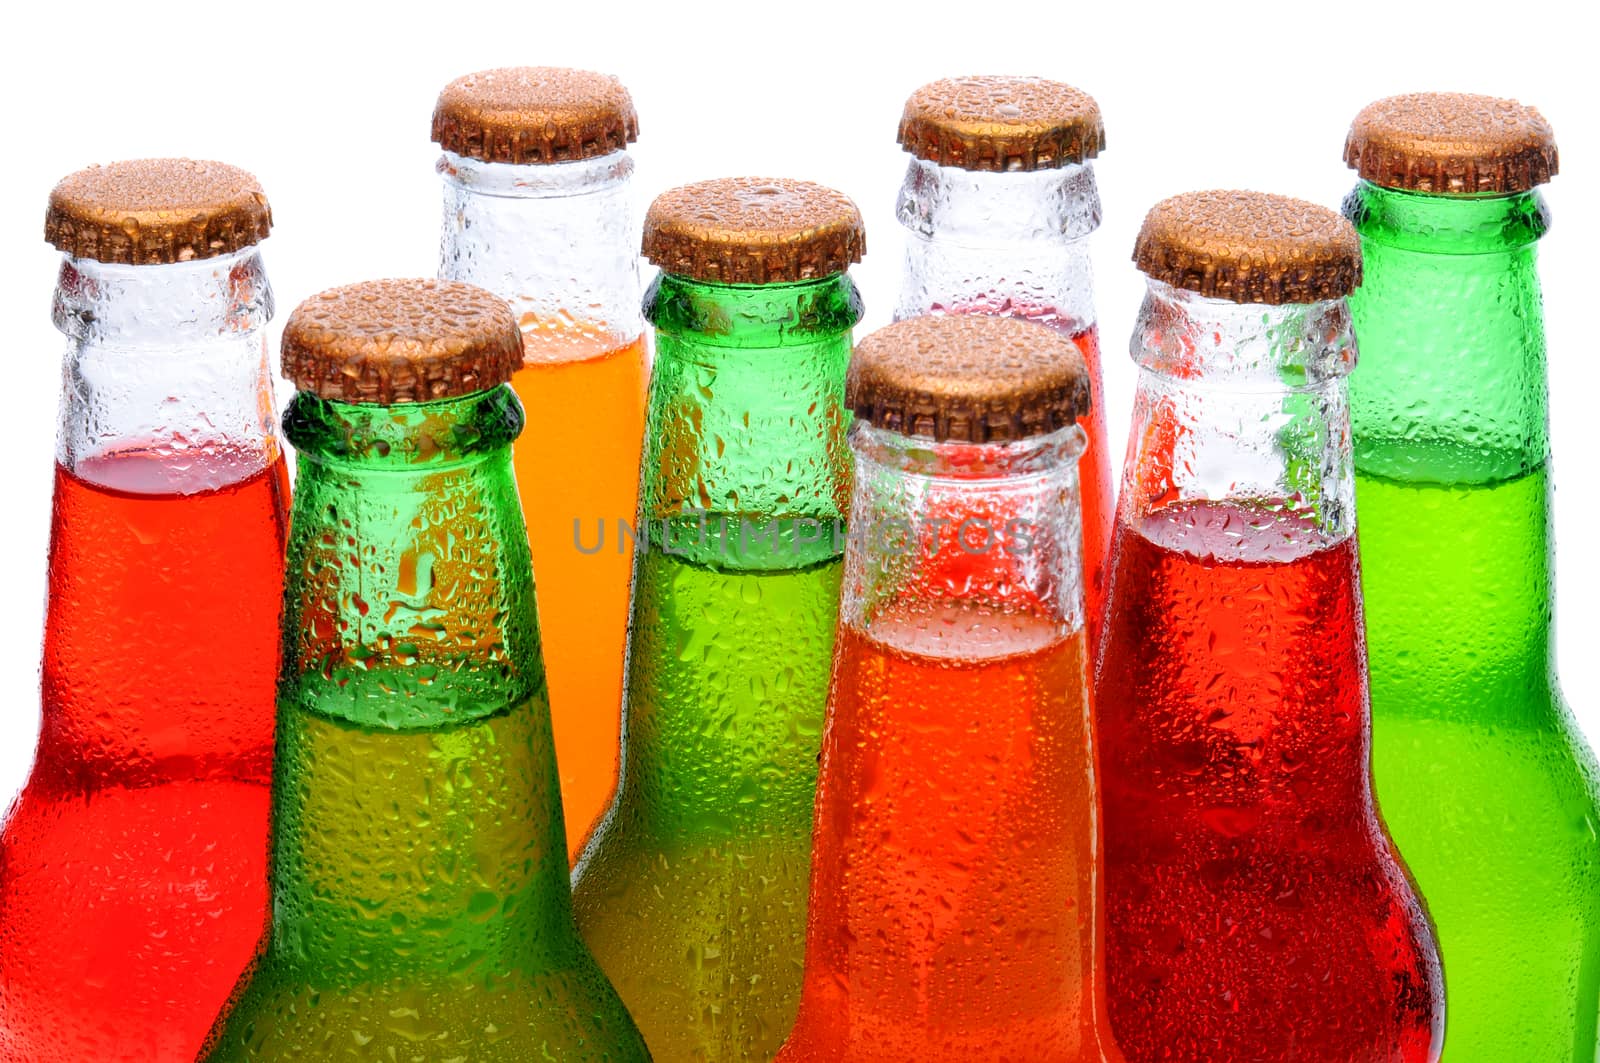 Closeup of several assorted flavors of soda pop. Orange, lemon lime, and strawberry soda bottles necks only over a white background.